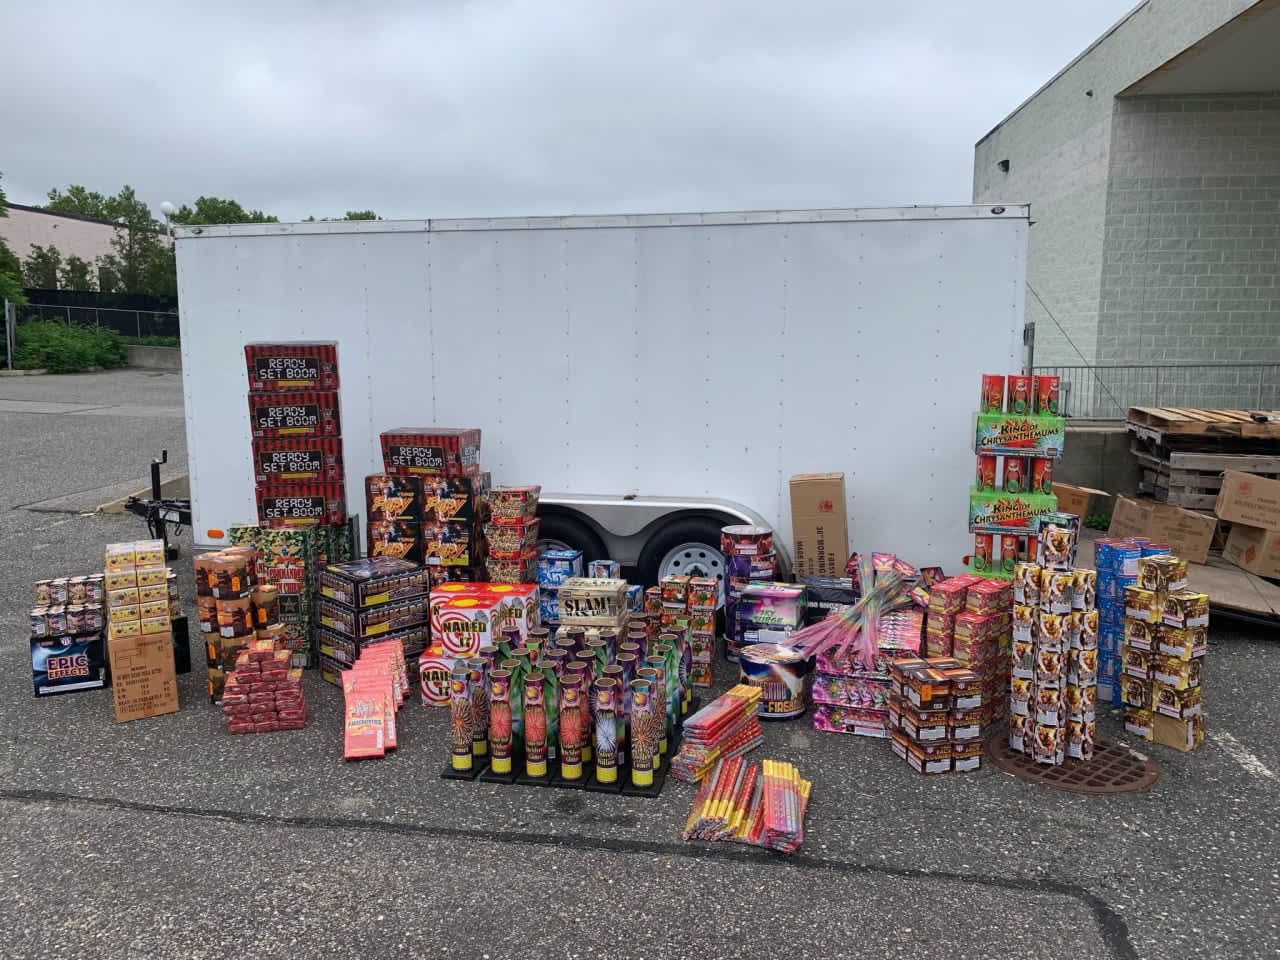 Approximately $2,000 worth of fireworks were seized from a Bohemia trailer.